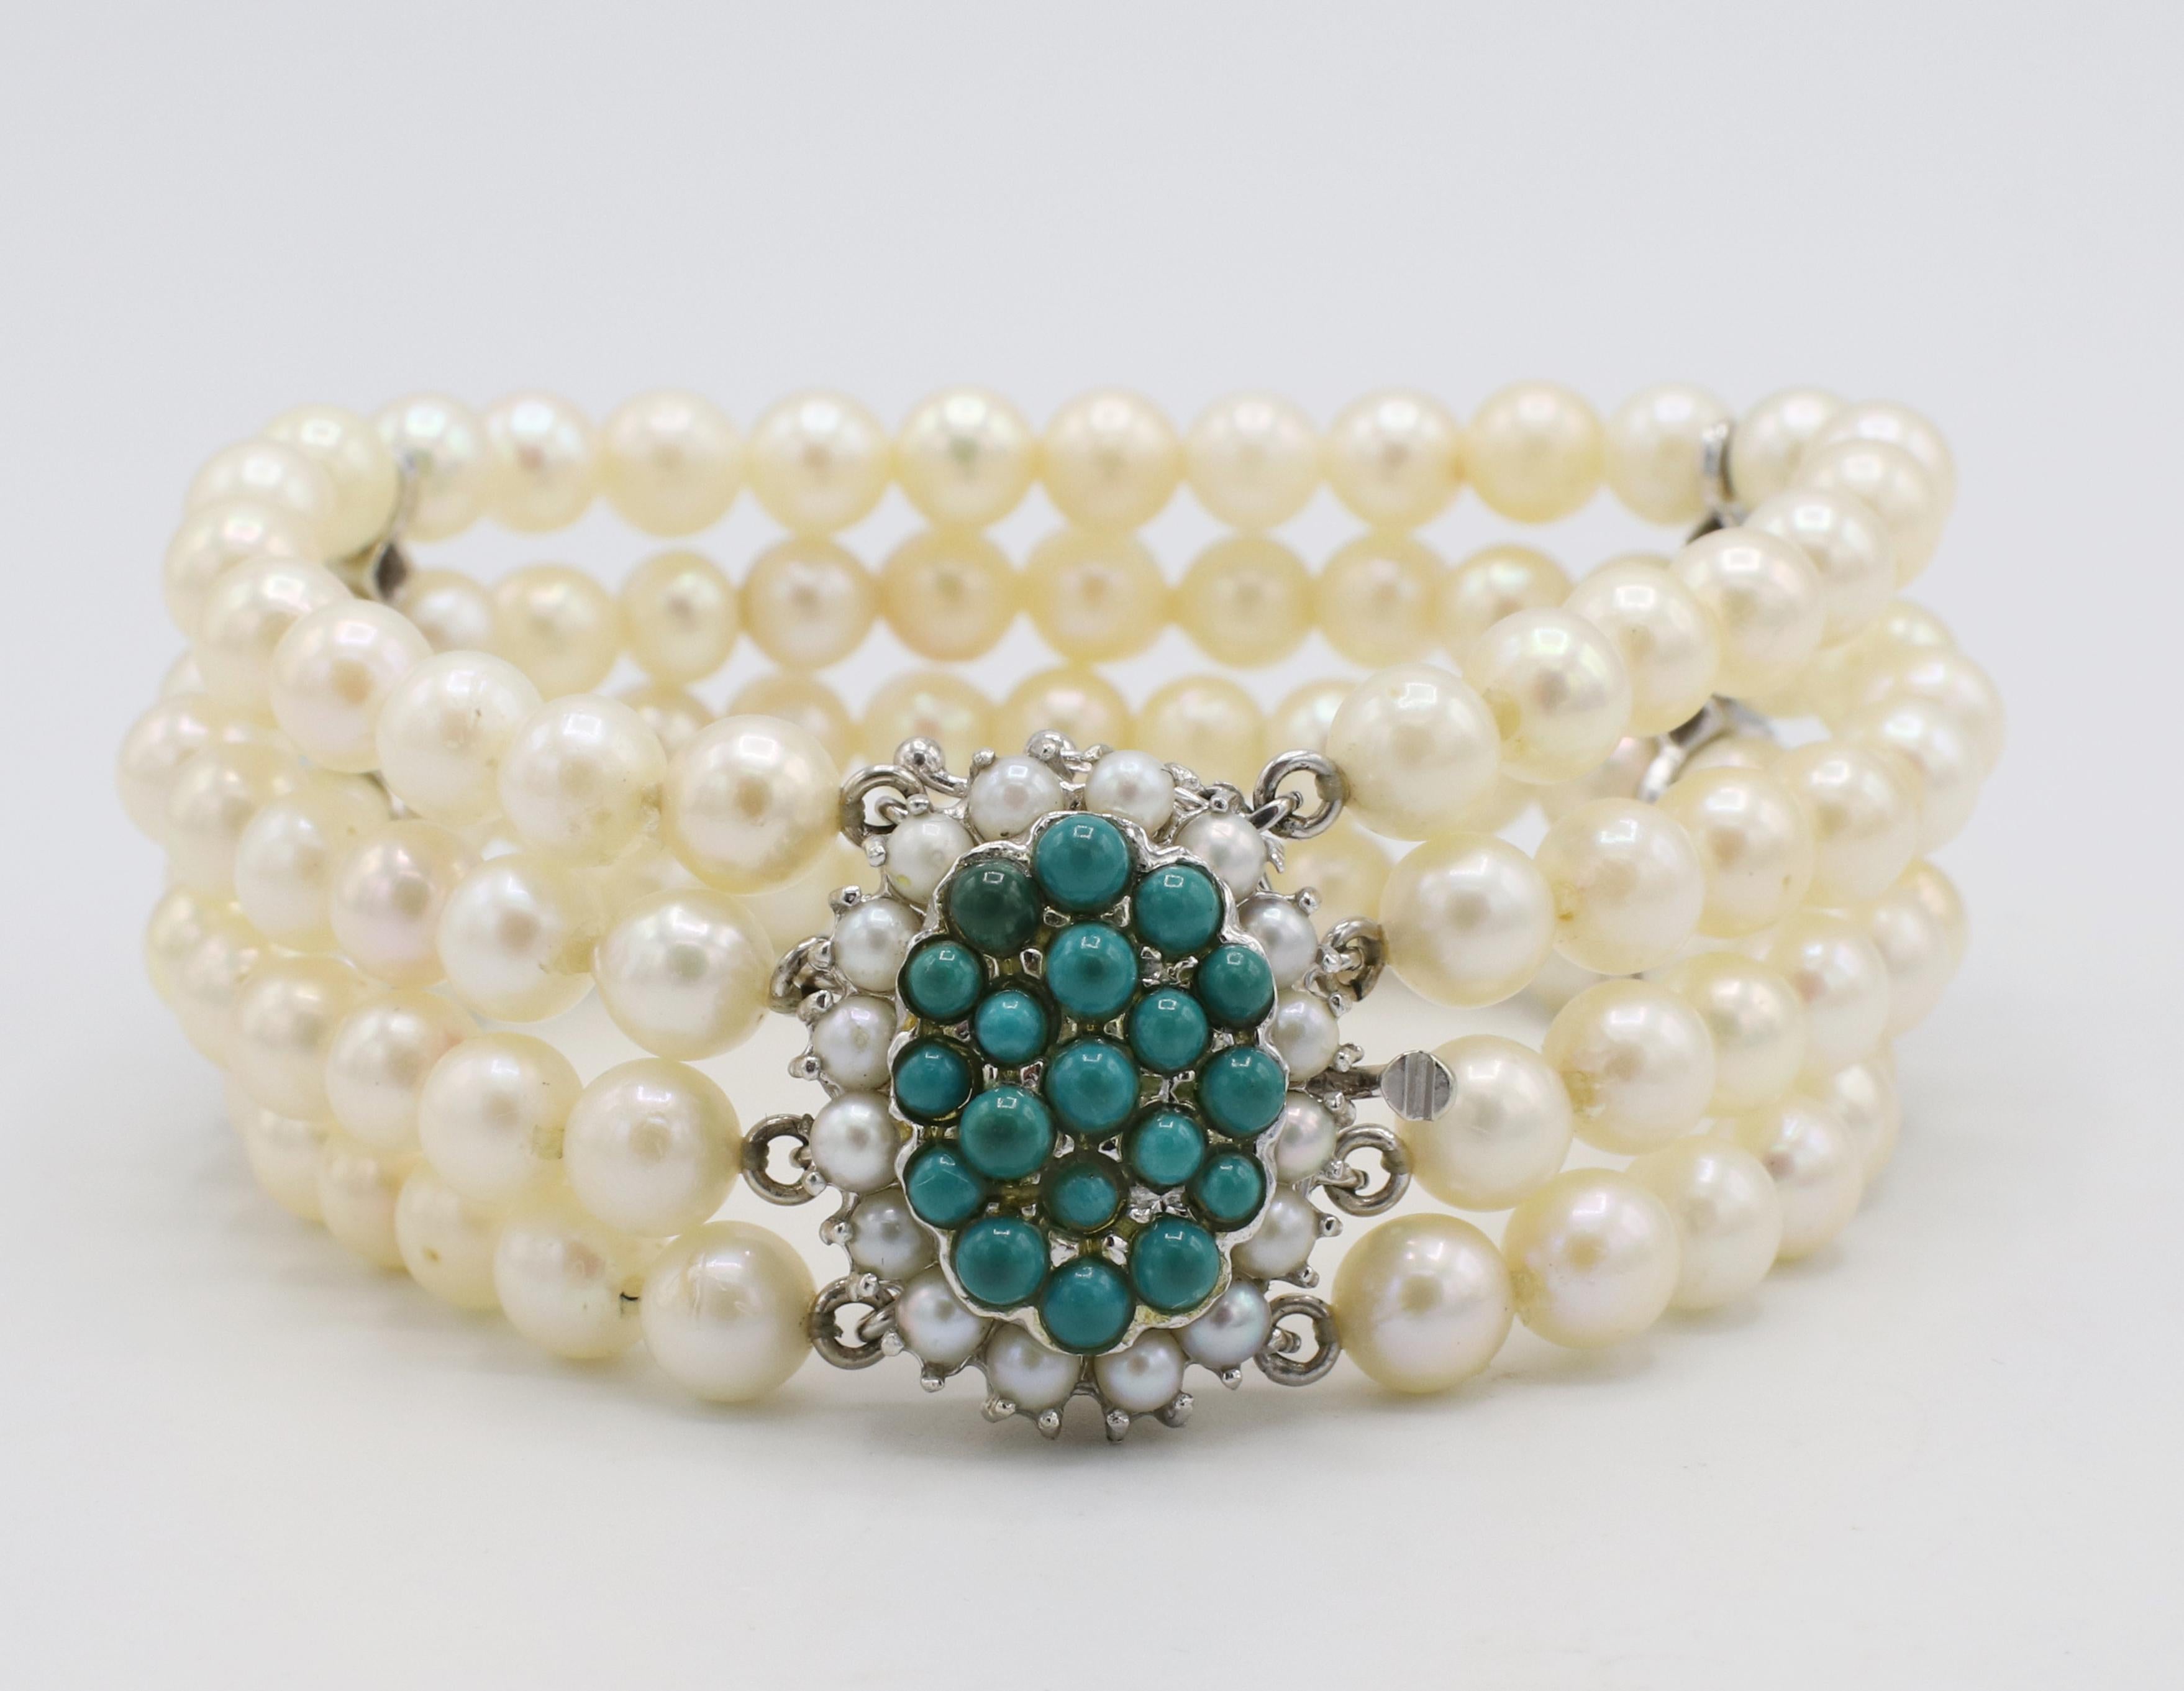 14 Karat White Gold 4-Row Pearl Bracelet With Turquoise Stations & Clasp In Good Condition For Sale In  Baltimore, MD